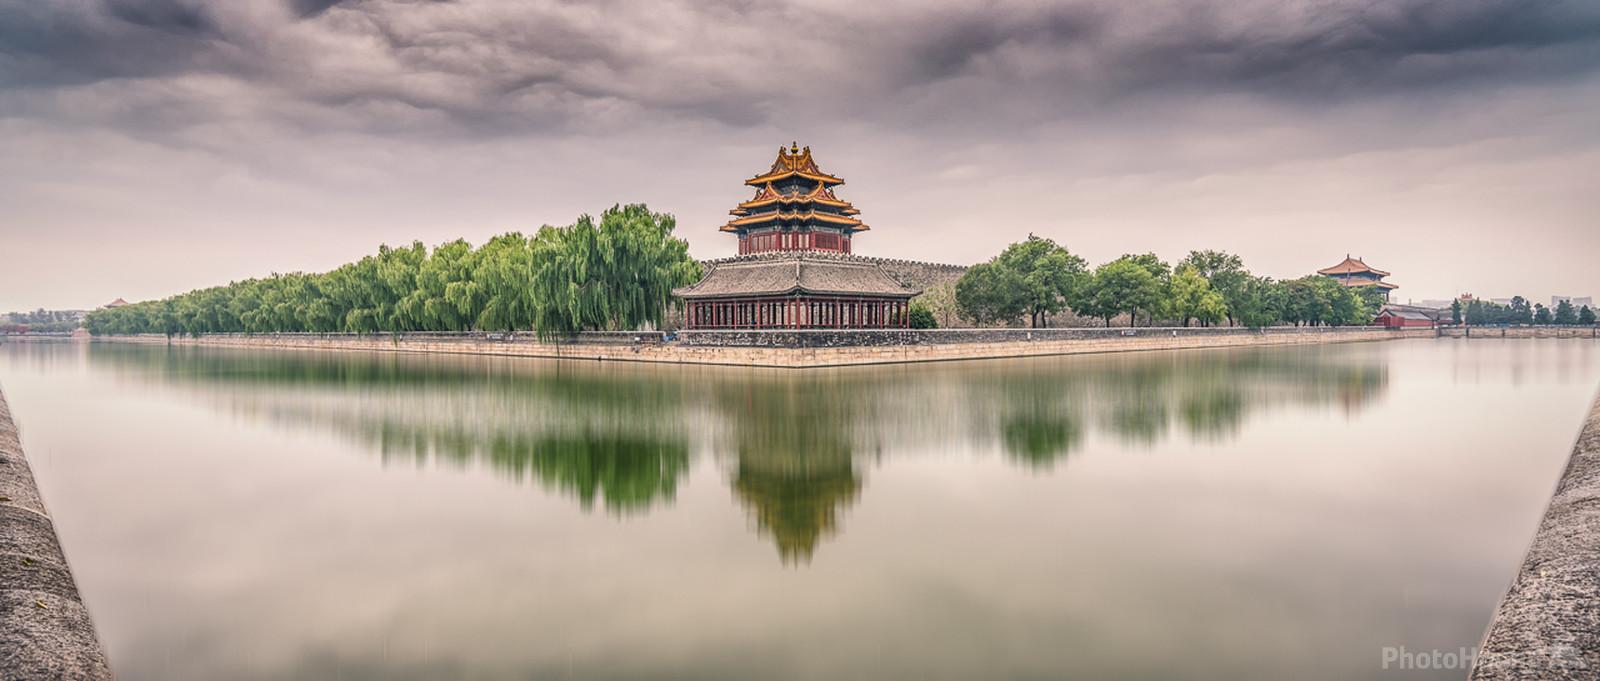 Image of Forbidden City - northern walls by James Billings.